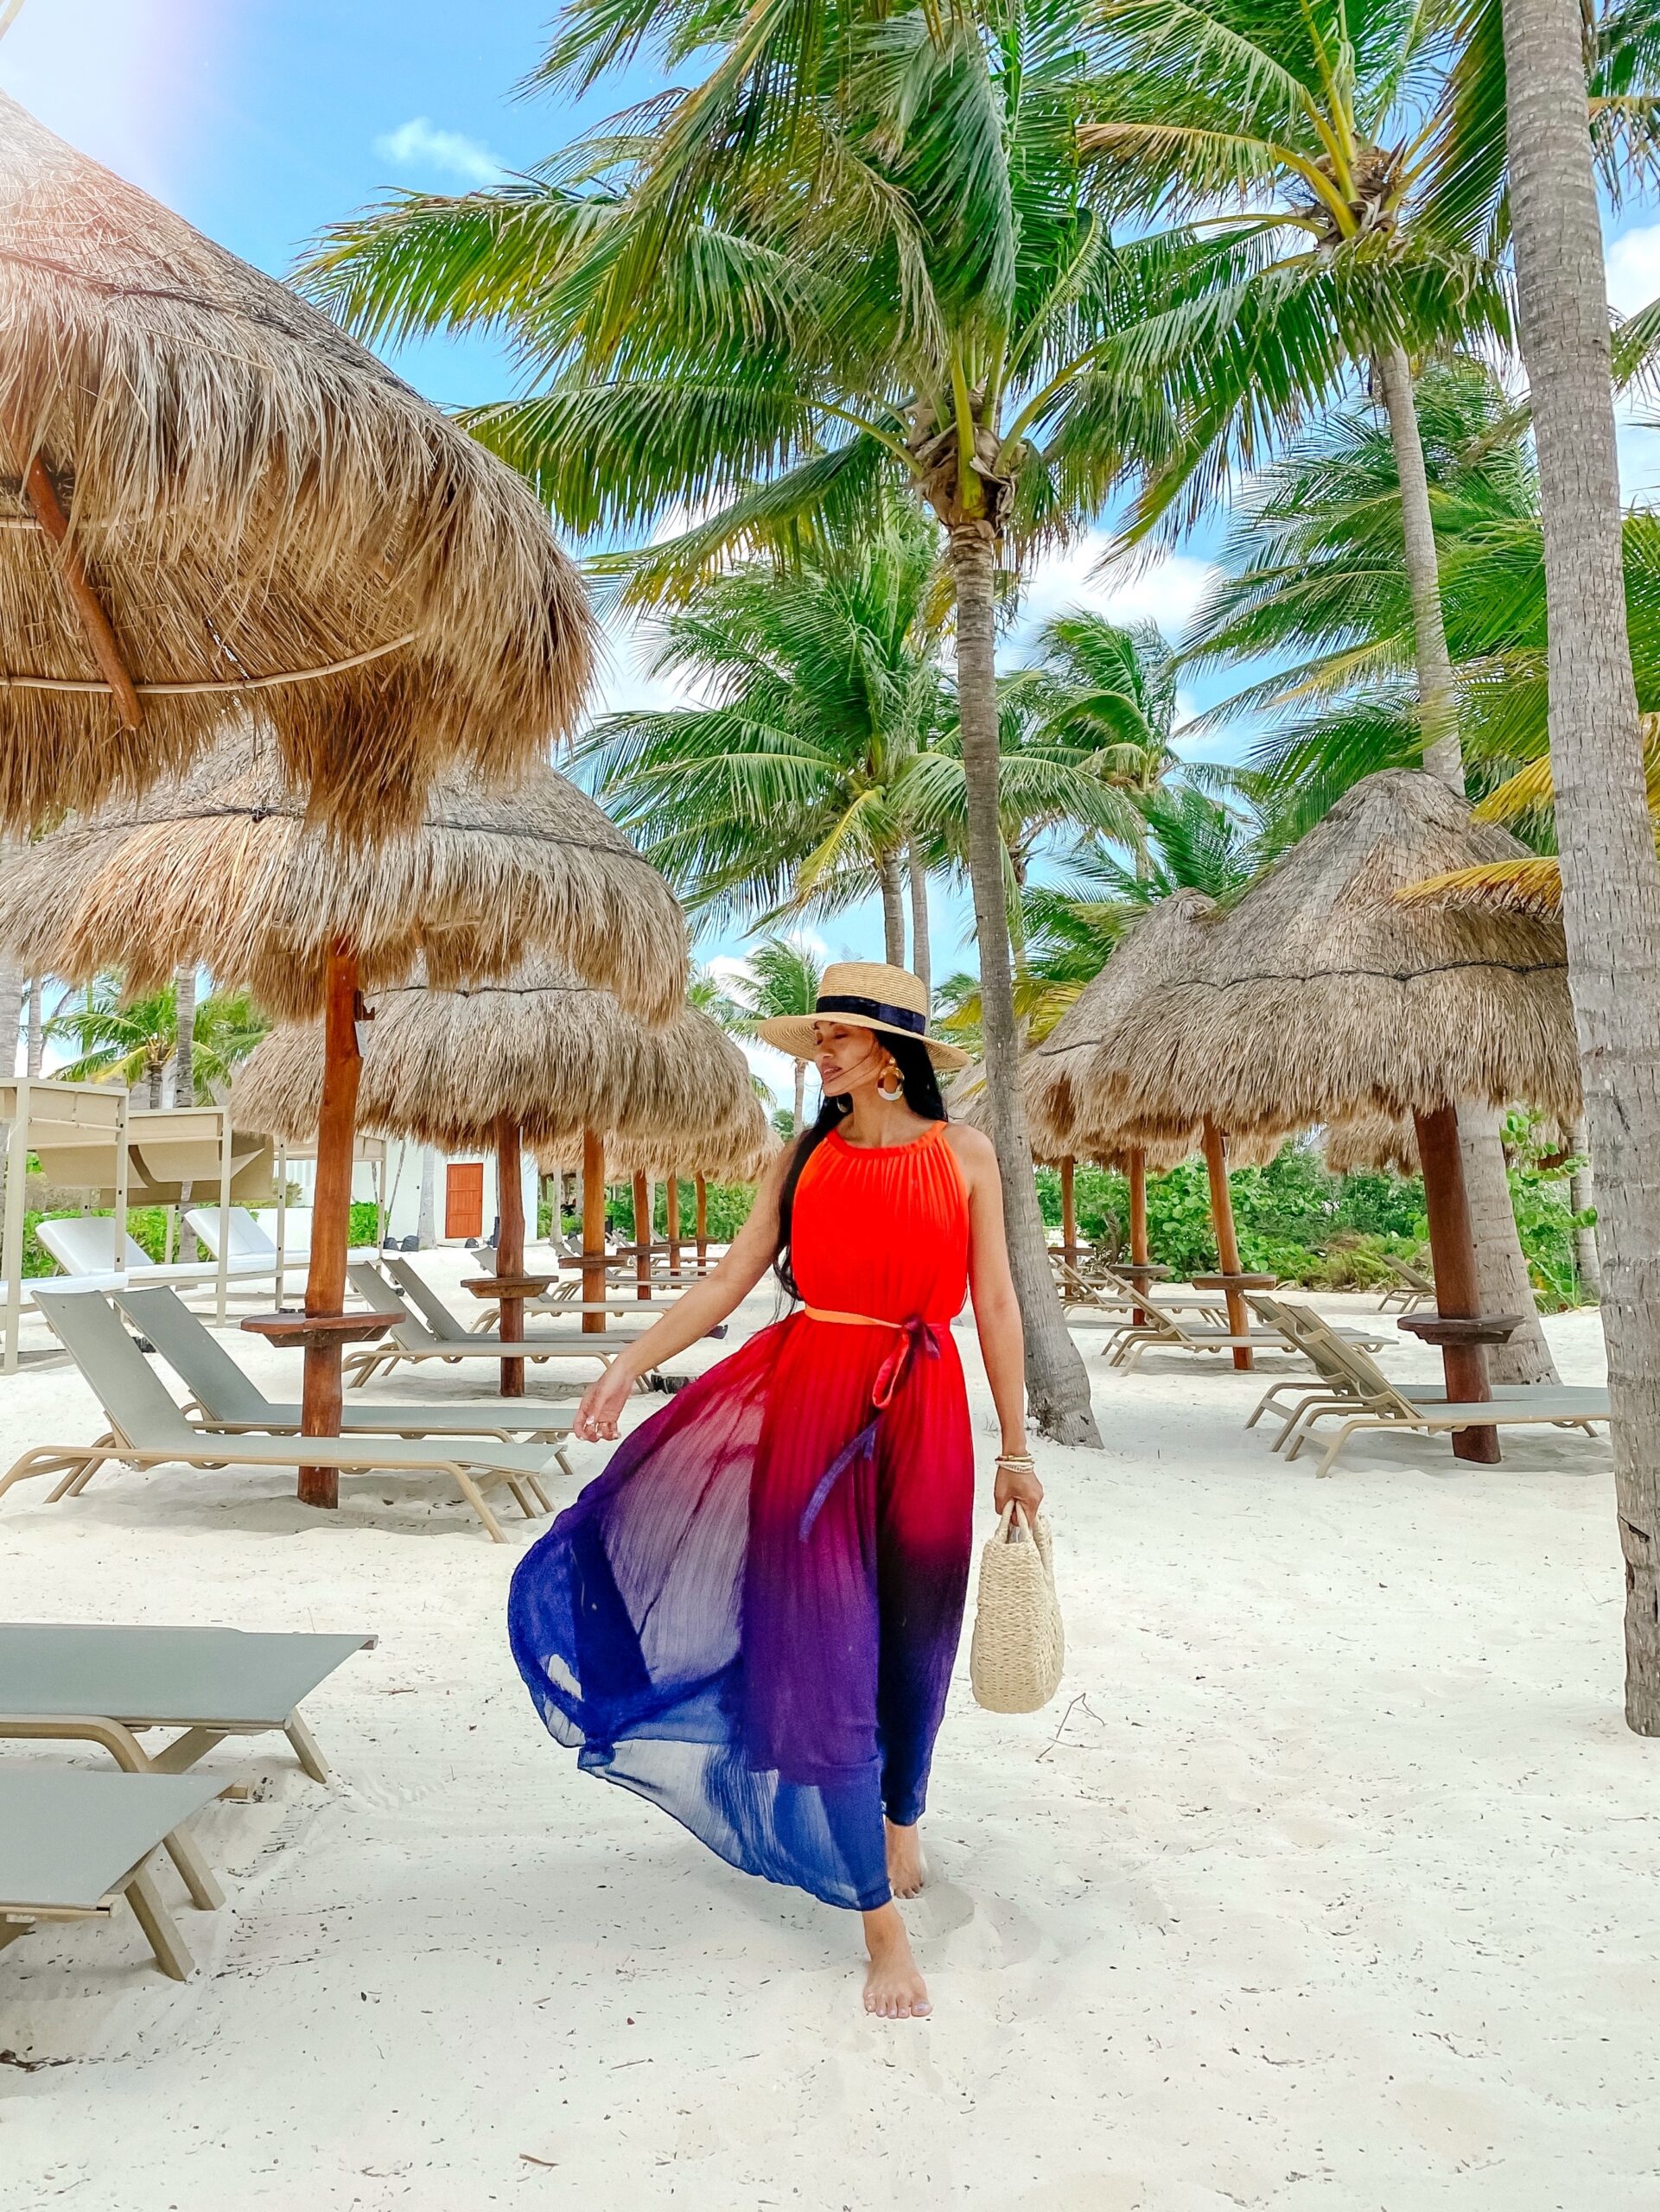 TRAVEL AFTER COVID, MEXICO, COVID RESTRICTIONS, OMBRE MAXI DRESS, VACATION STYLE